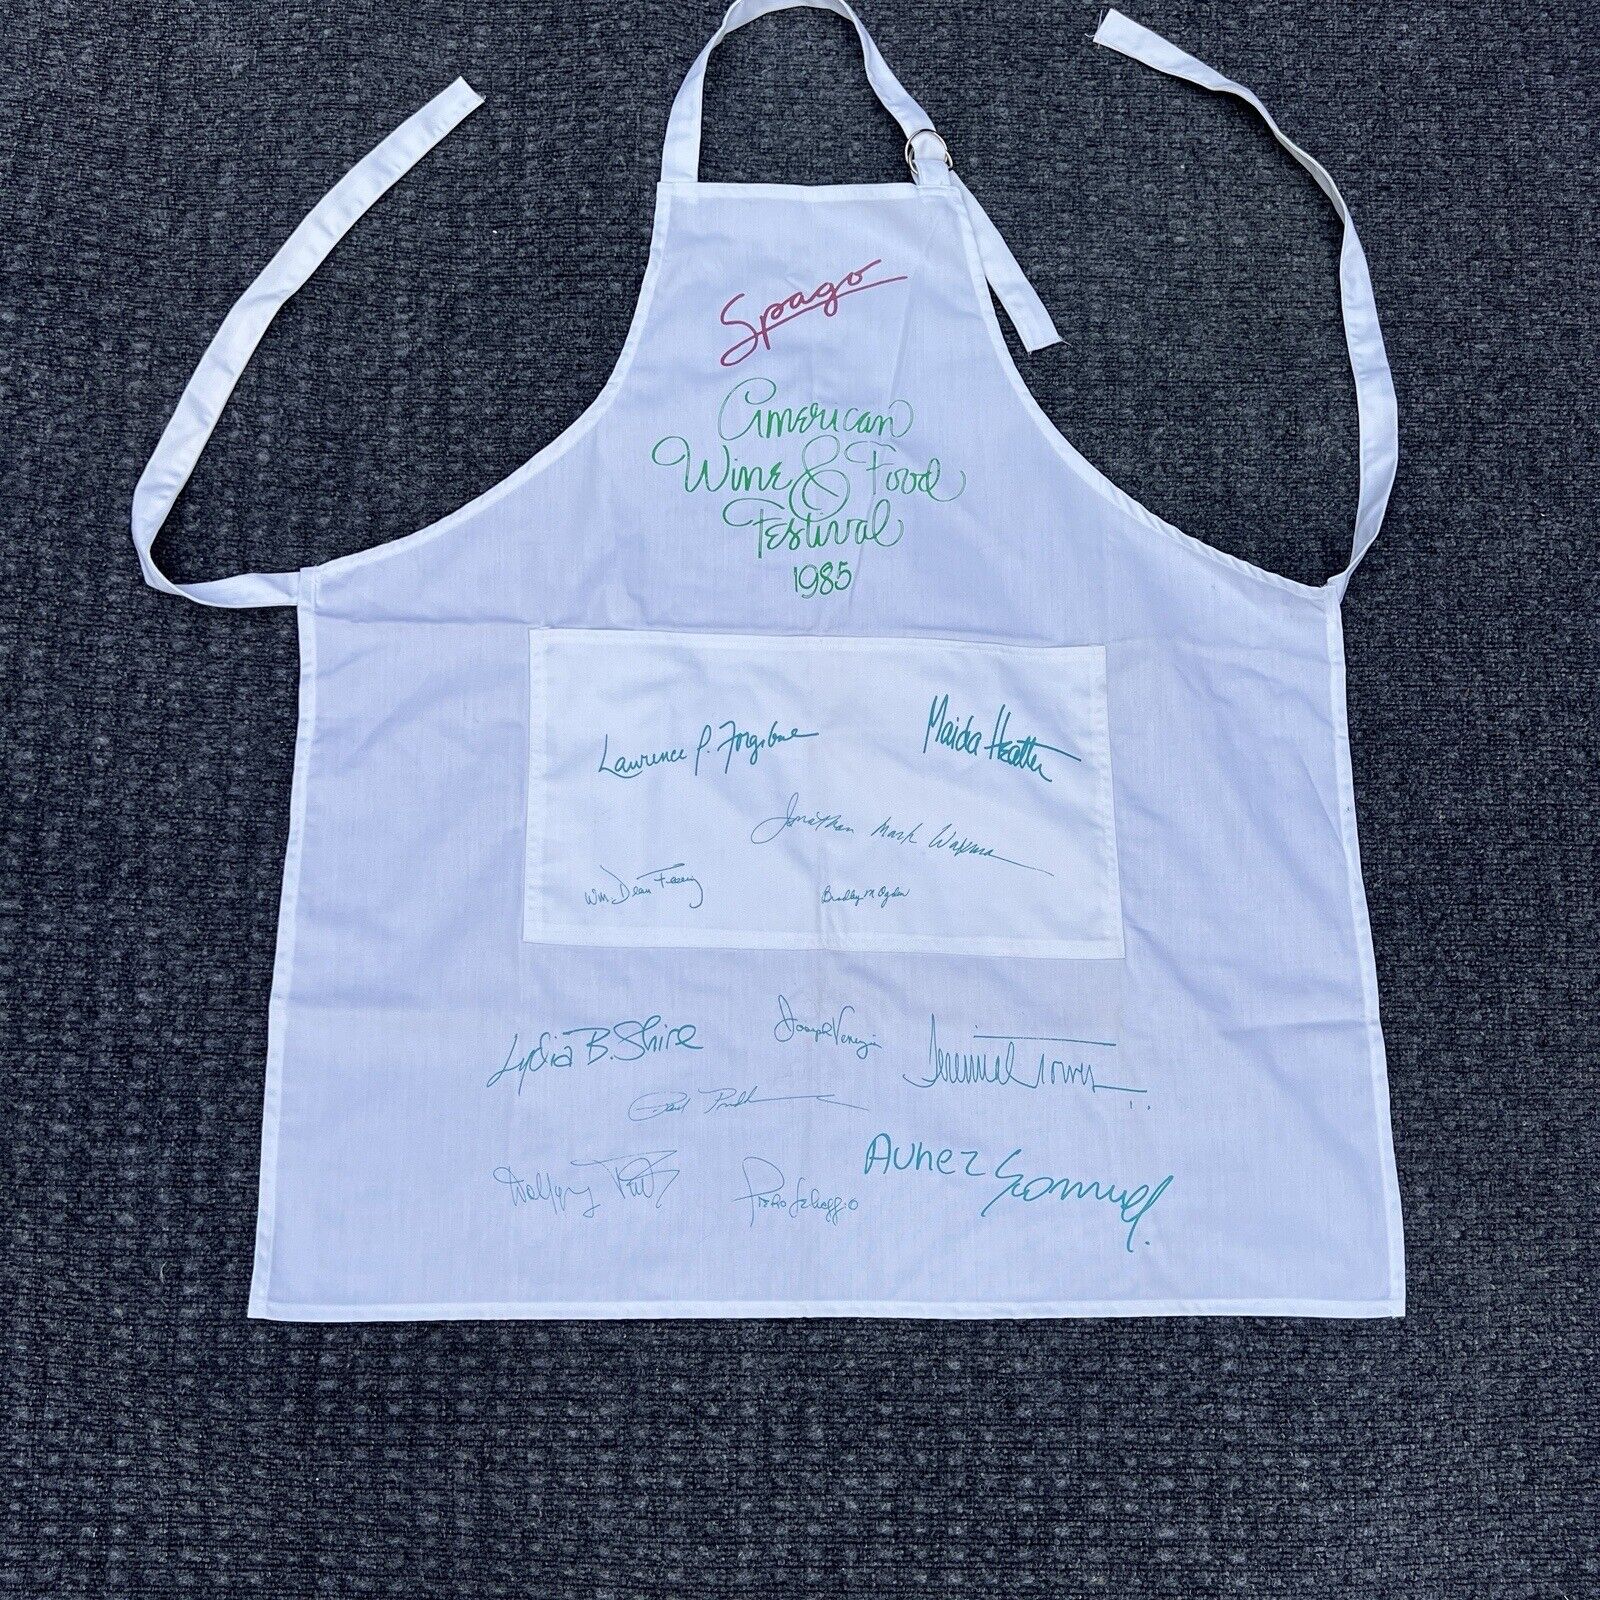 Rare Spago Apron Signed By Prudhomme/Wolfgang/ Other Great Chefs 1985